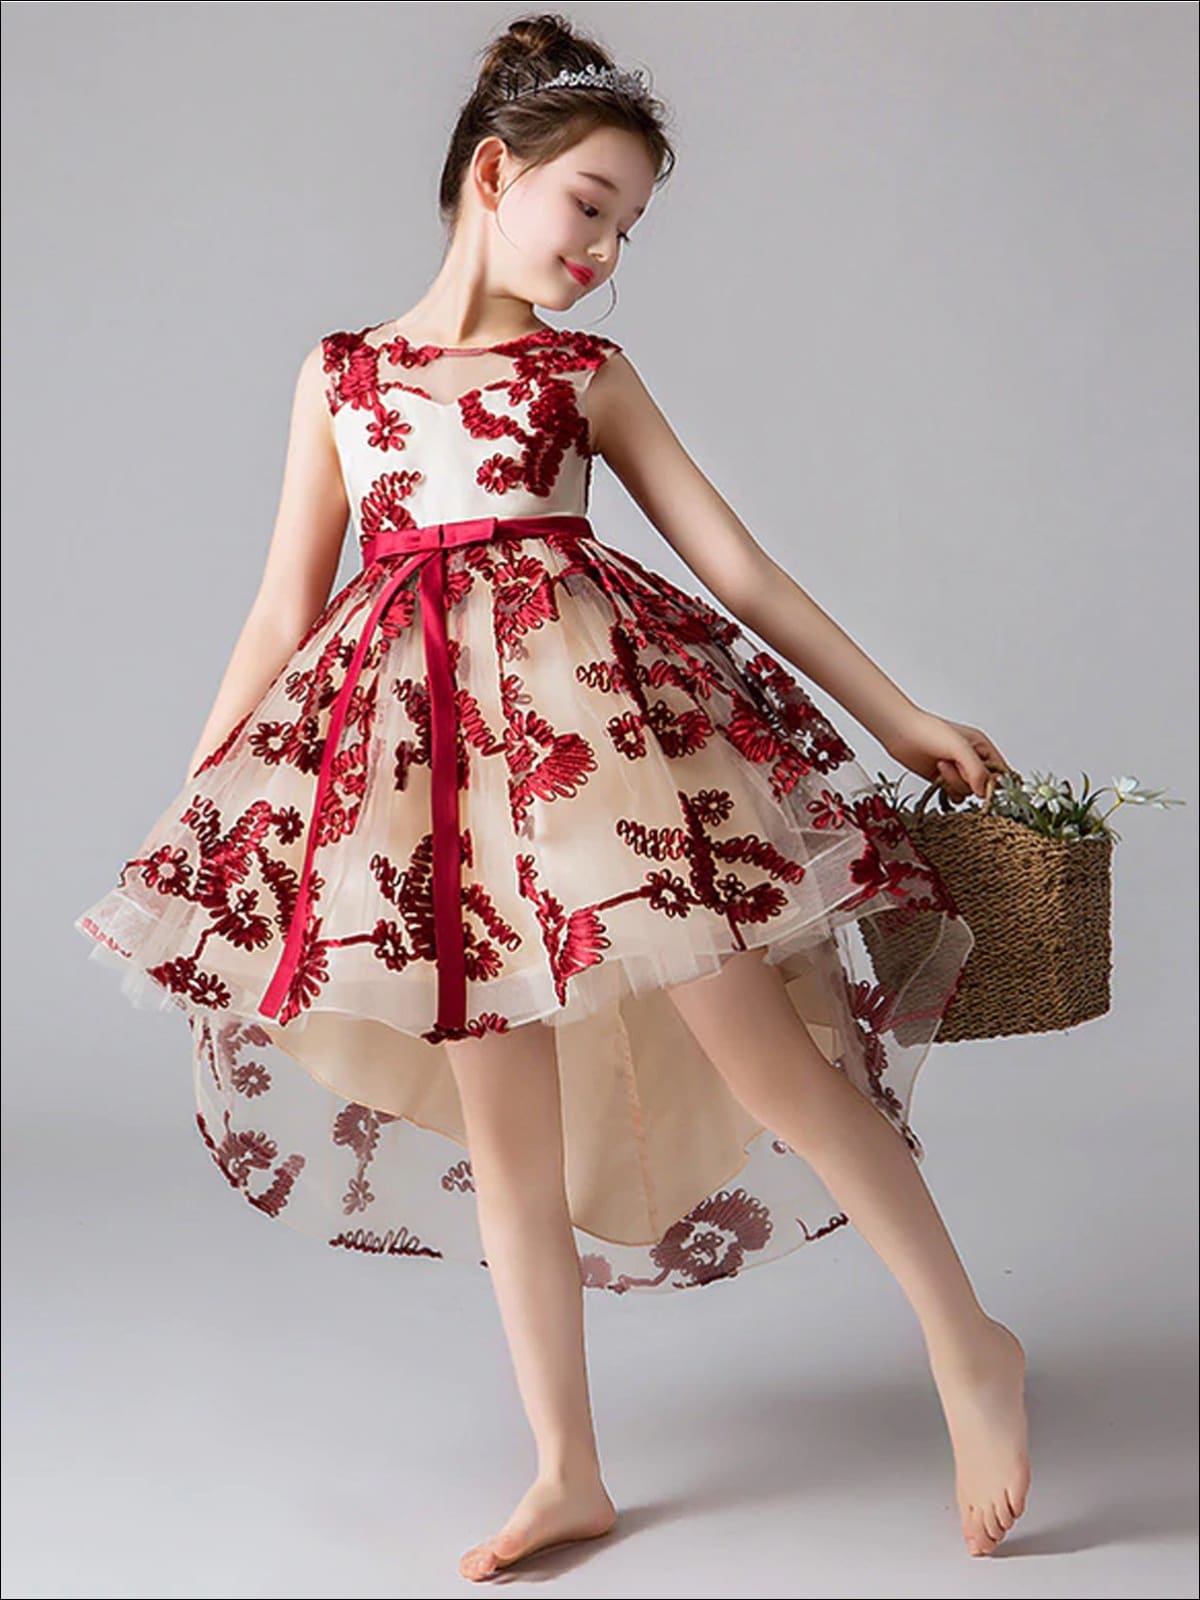 Winter Formal Dresses | Sleeveless Embroidered Hi-Lo Holiday Dress